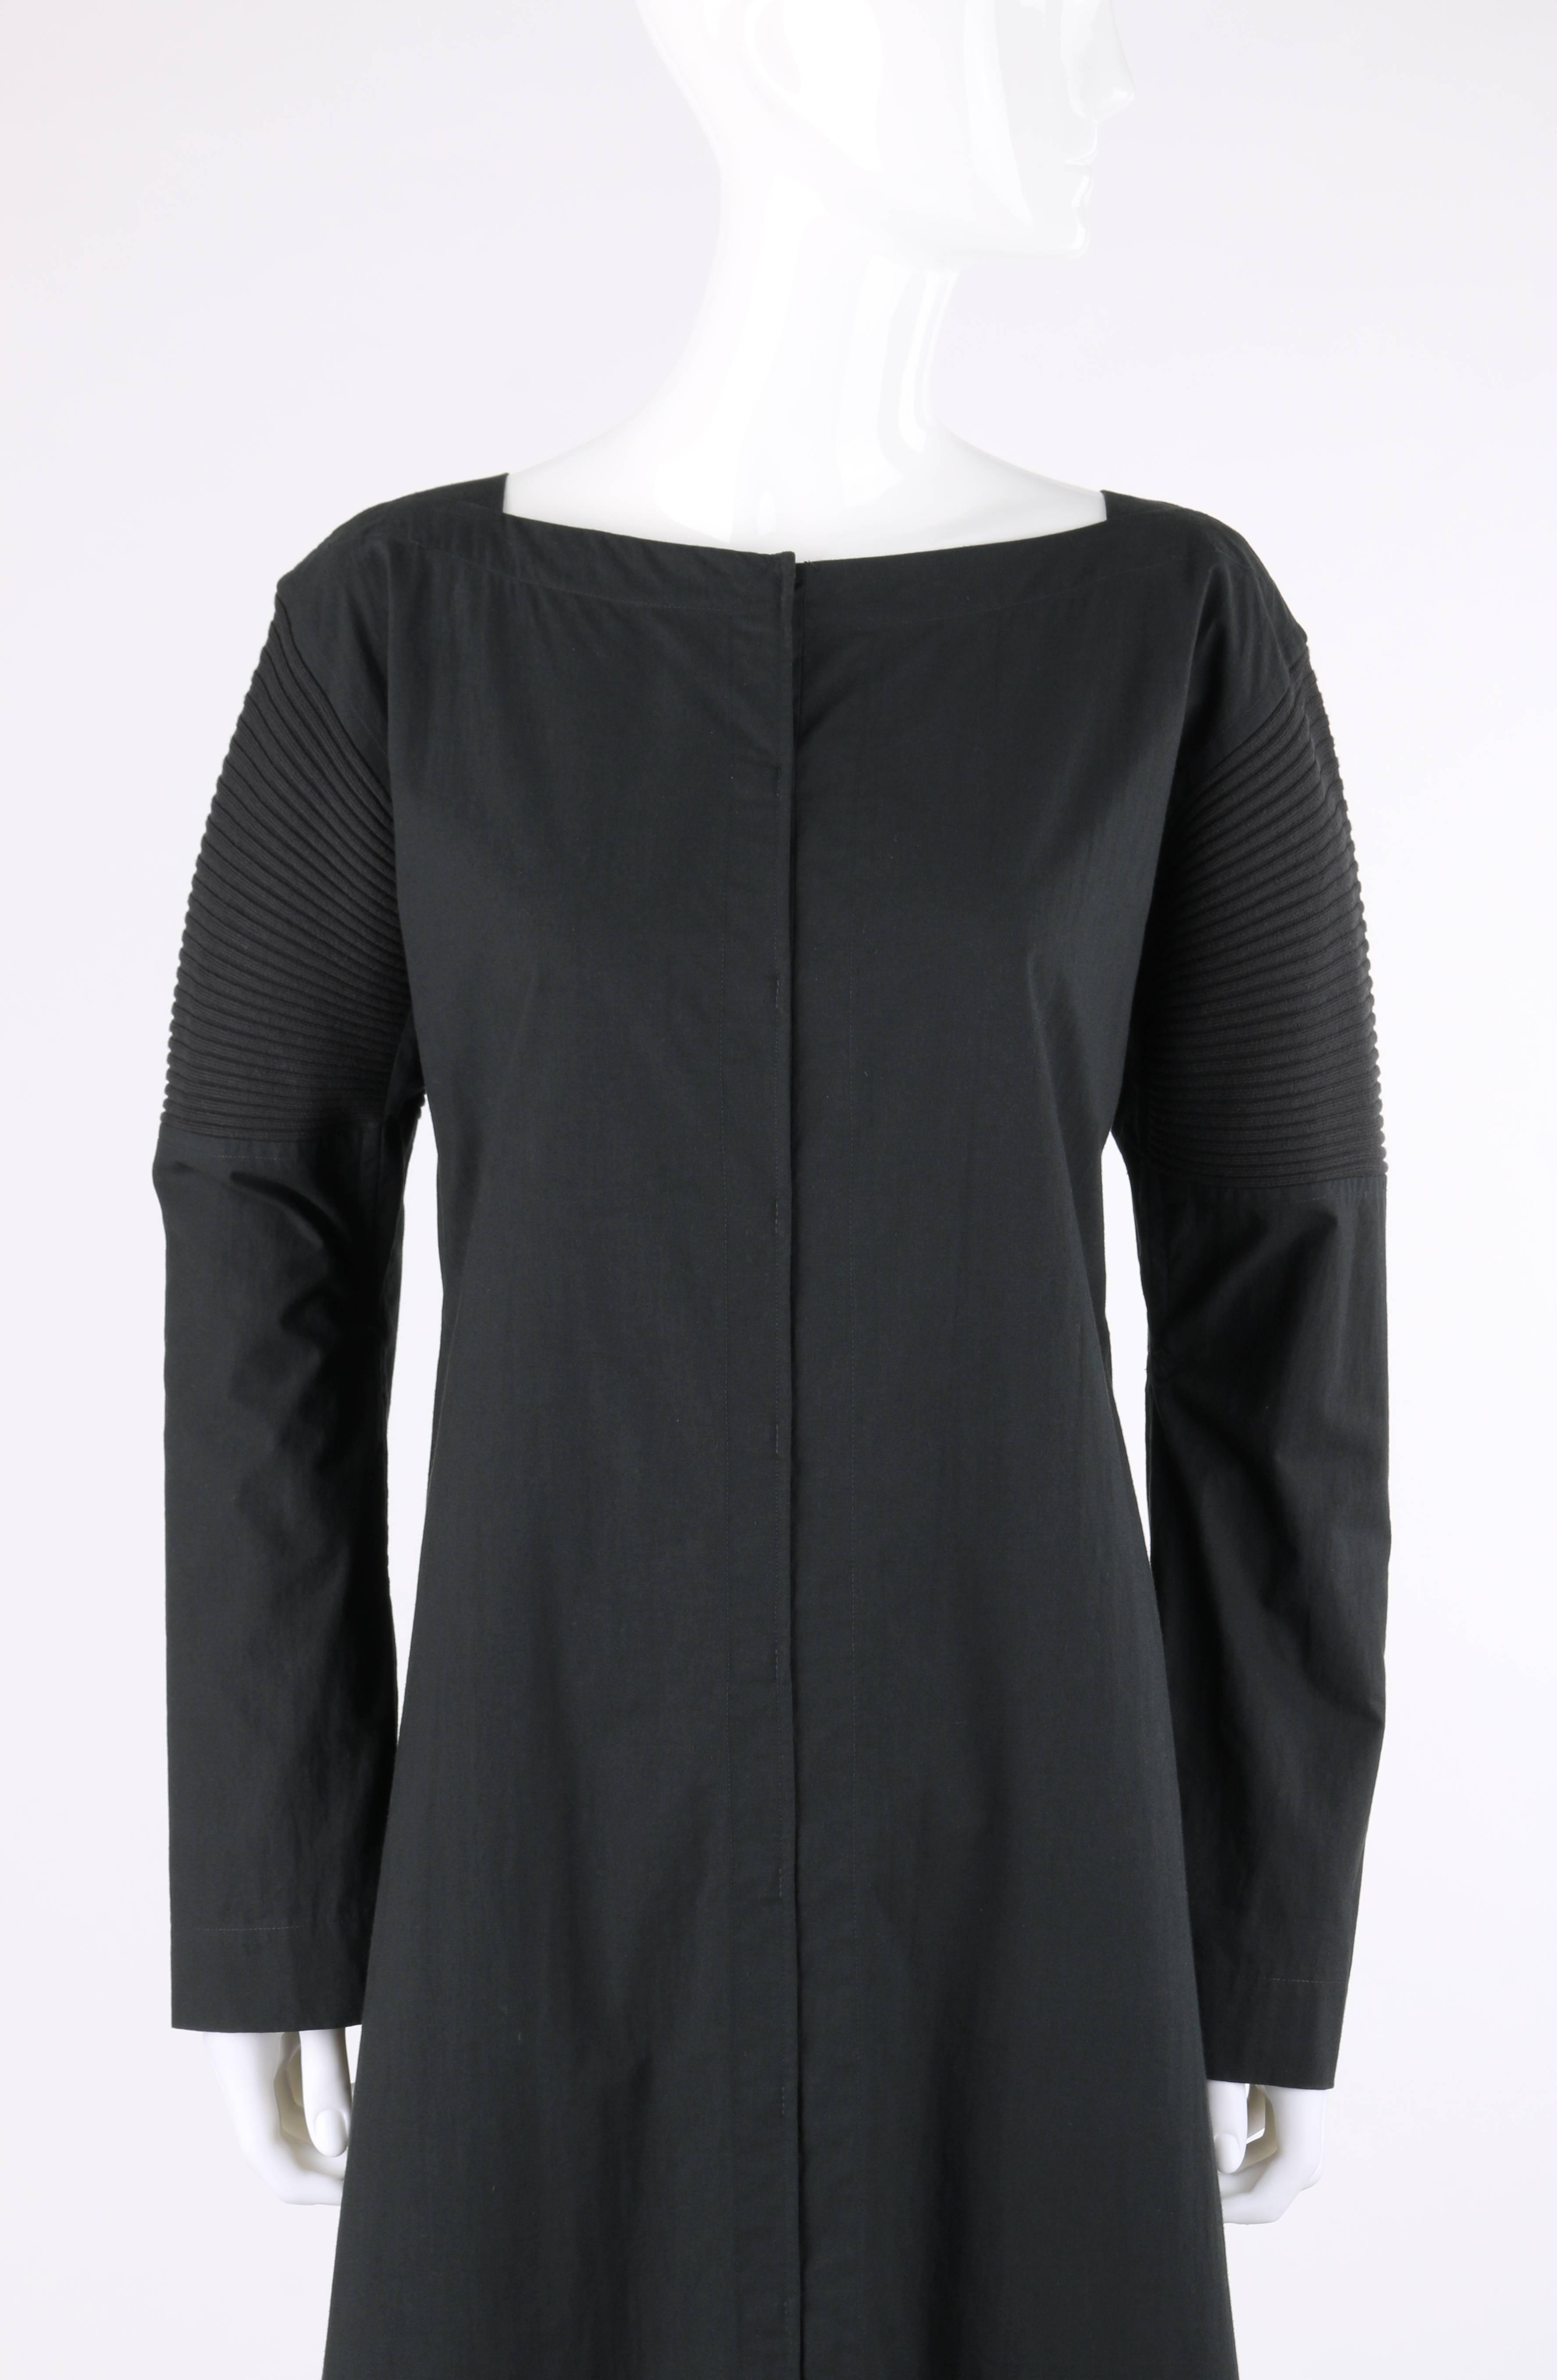 Issey Miyake black cotton rib knit detail long sleeve full length coat dress. Square bateau neckline. Drop shoulder. Long sleeves with rib knit panel from shoulder to elbow. Underarm gussets. Twelve center front concealed hook and loop closures.